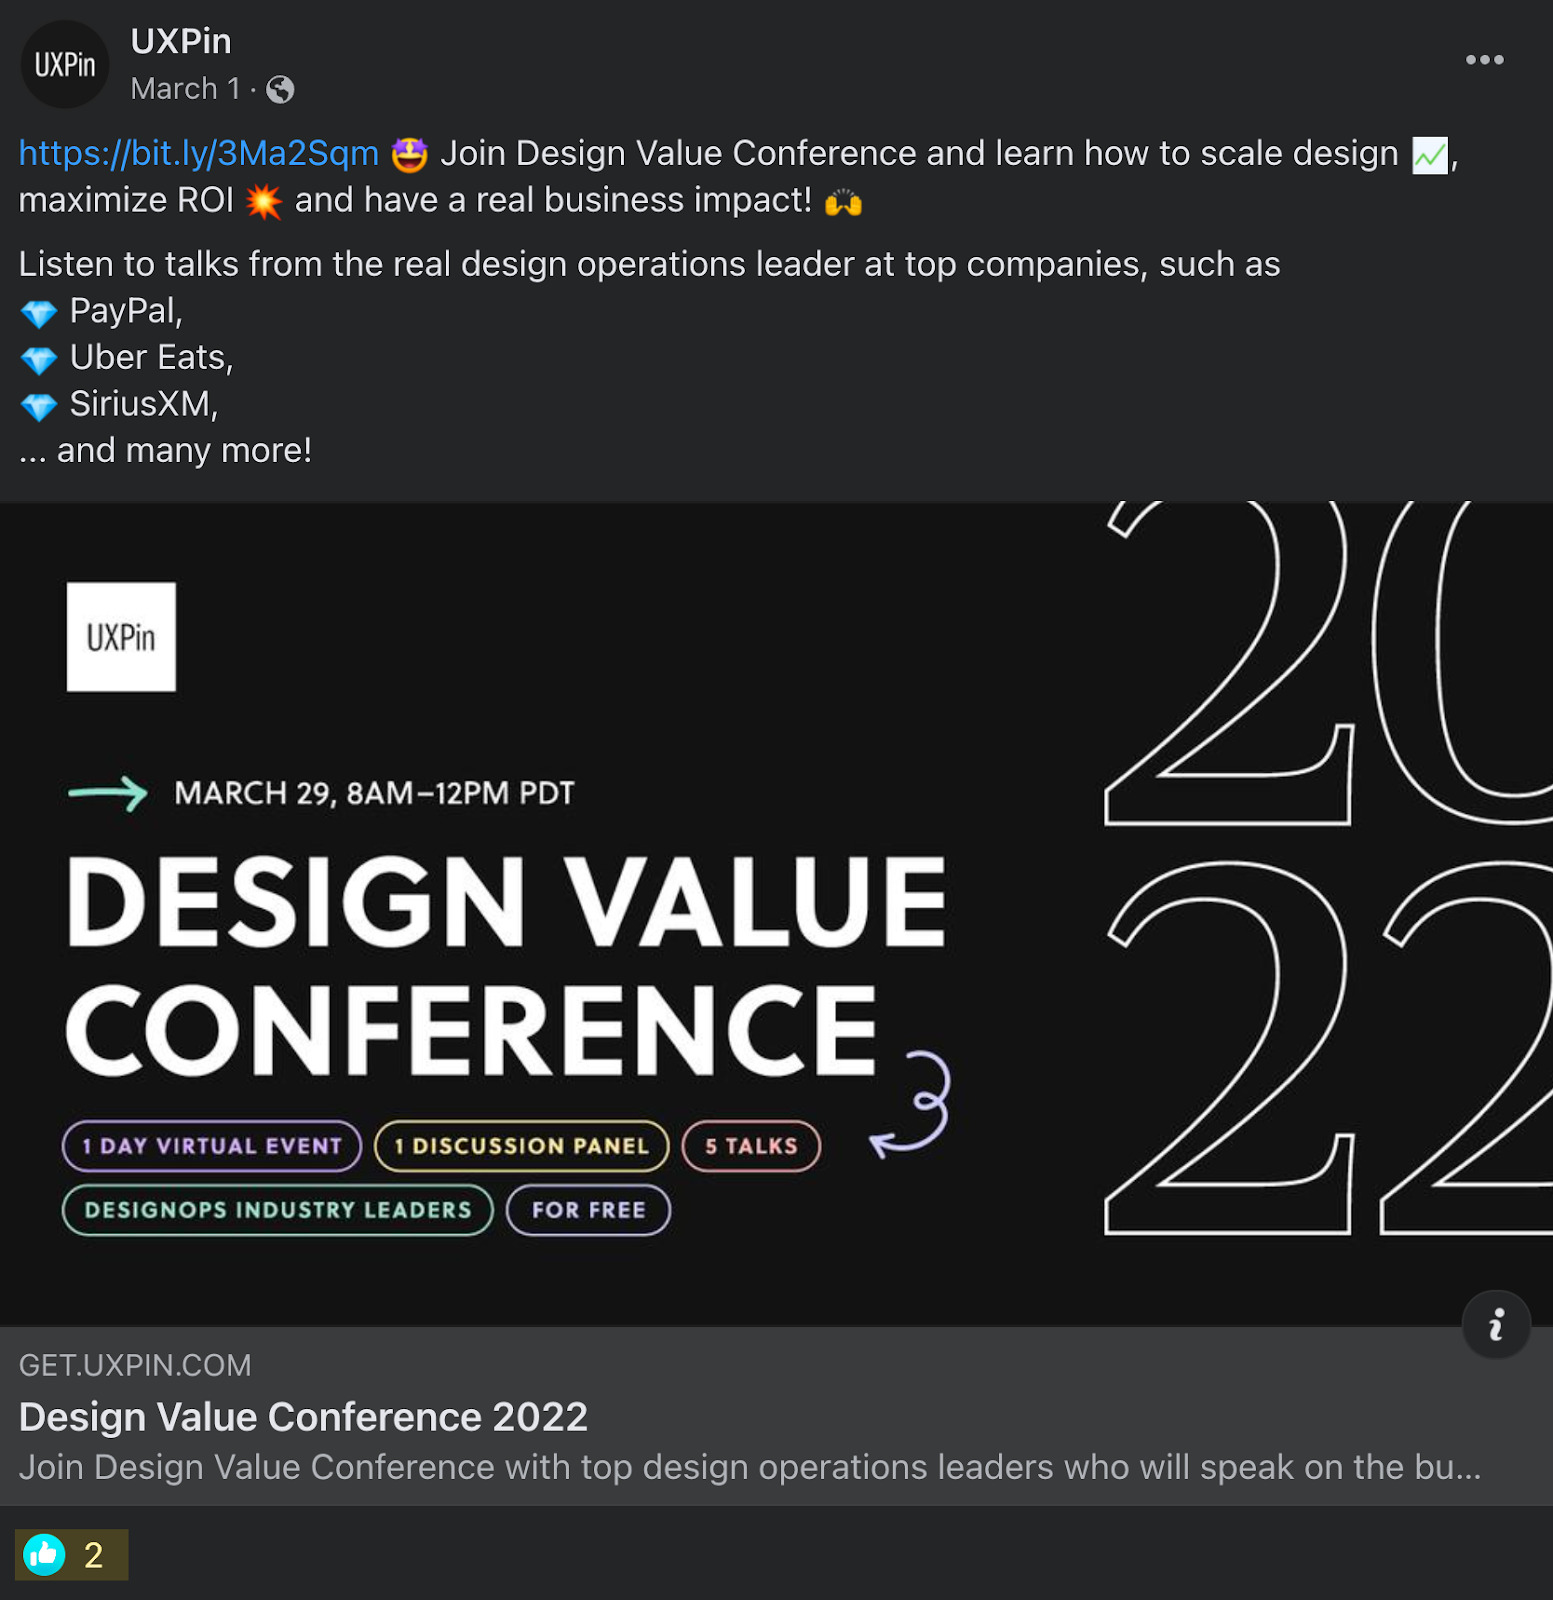 Facebook post about Design Value Conference only got two "likes"